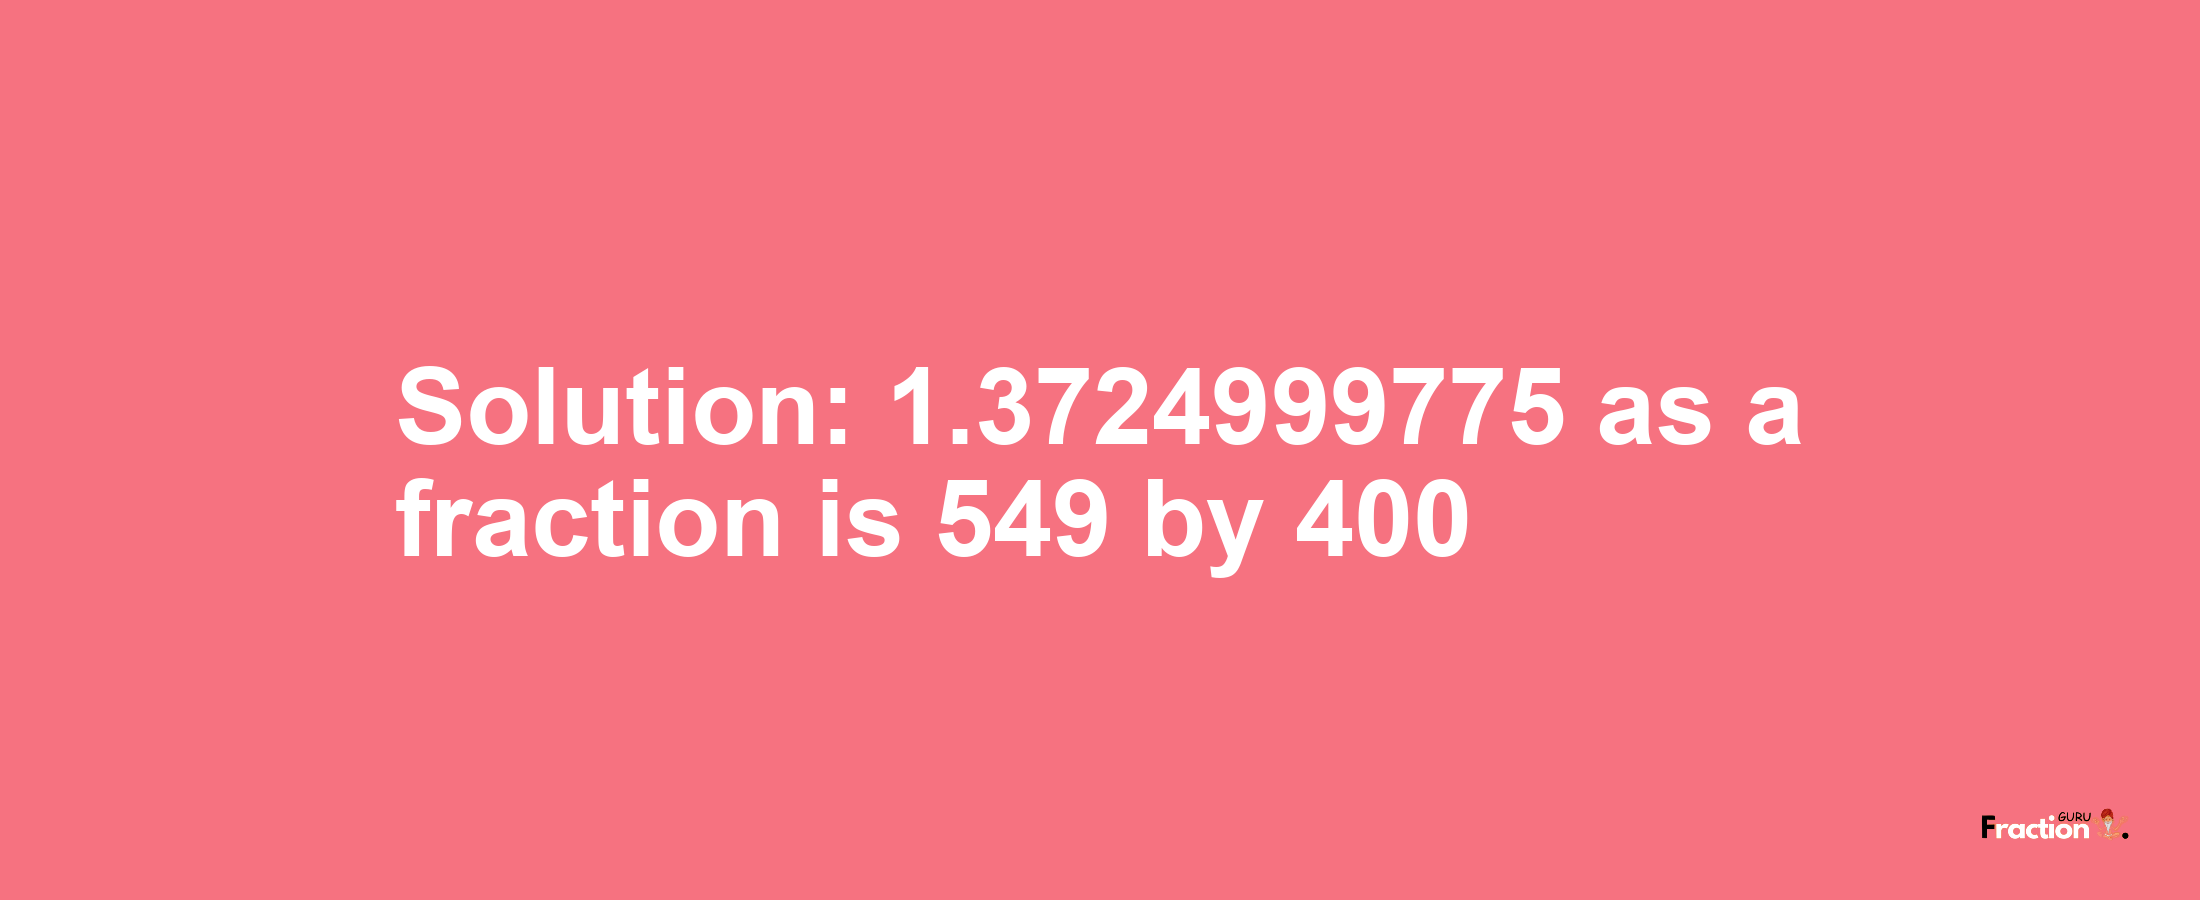 Solution:1.3724999775 as a fraction is 549/400